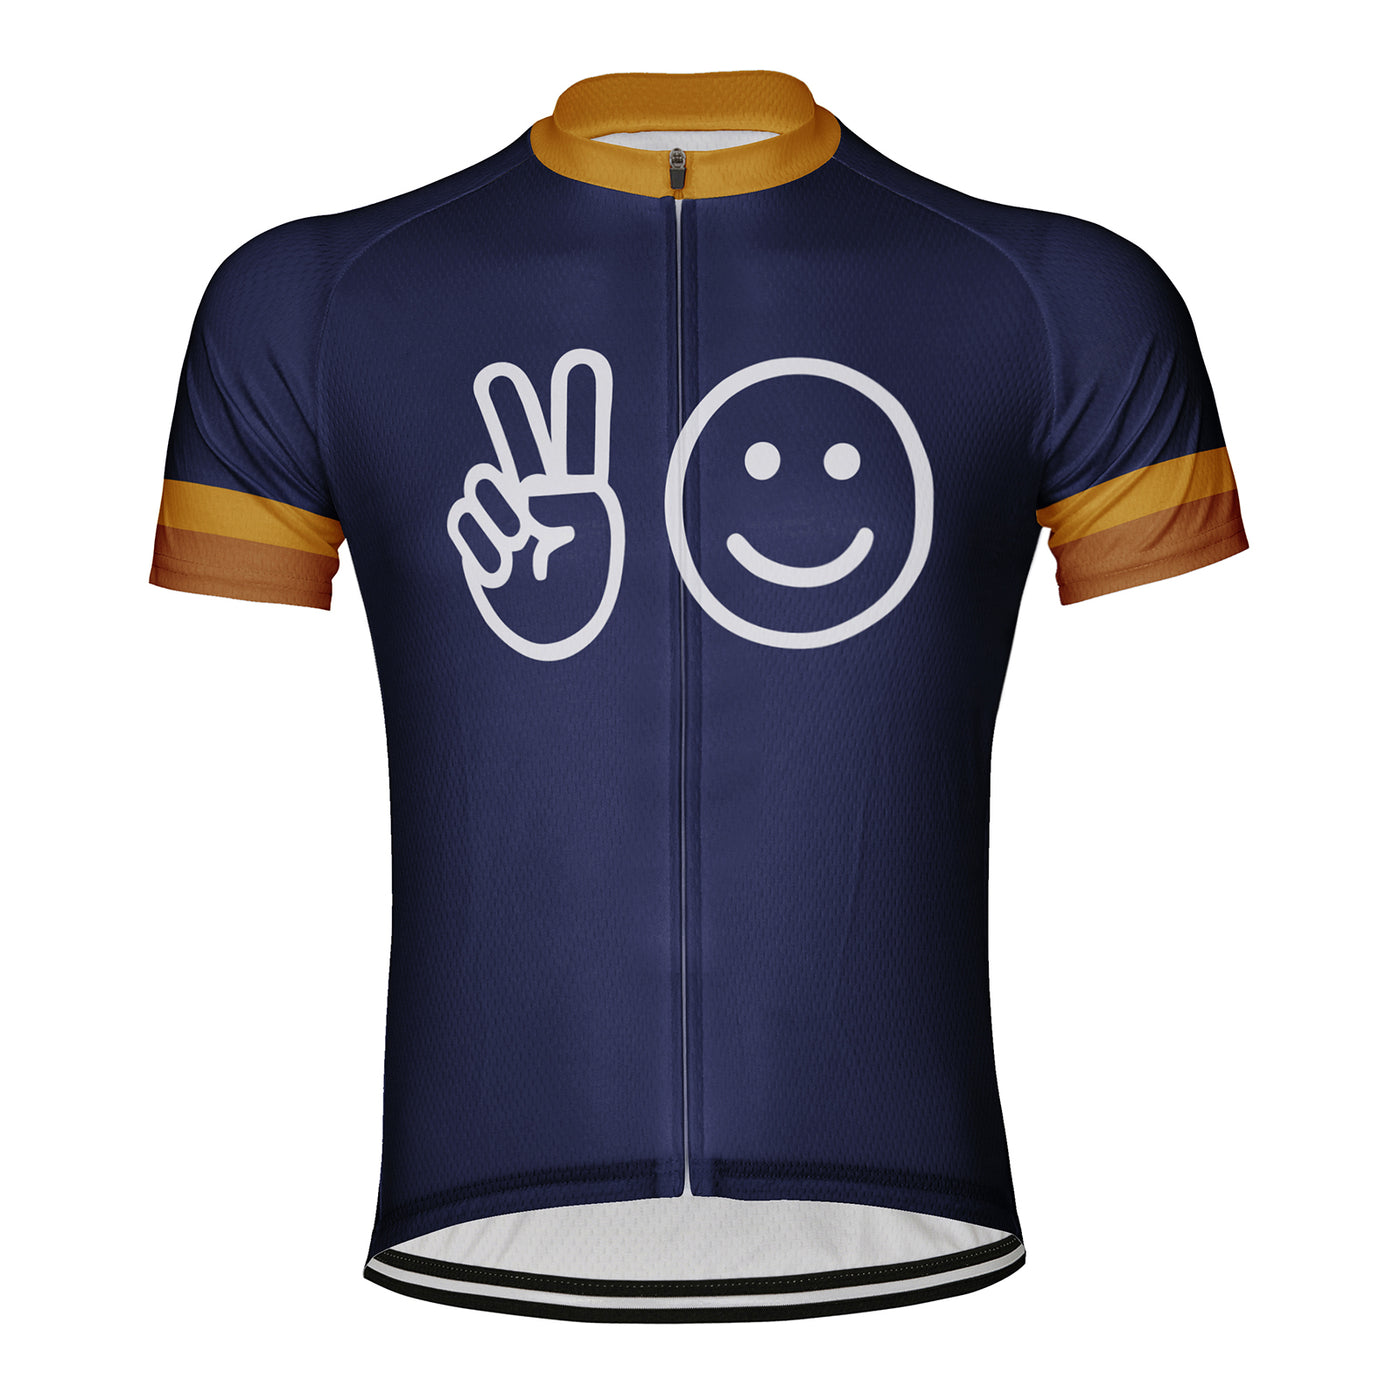 Customized Smile Men's Cycling Jersey Short Sleeve